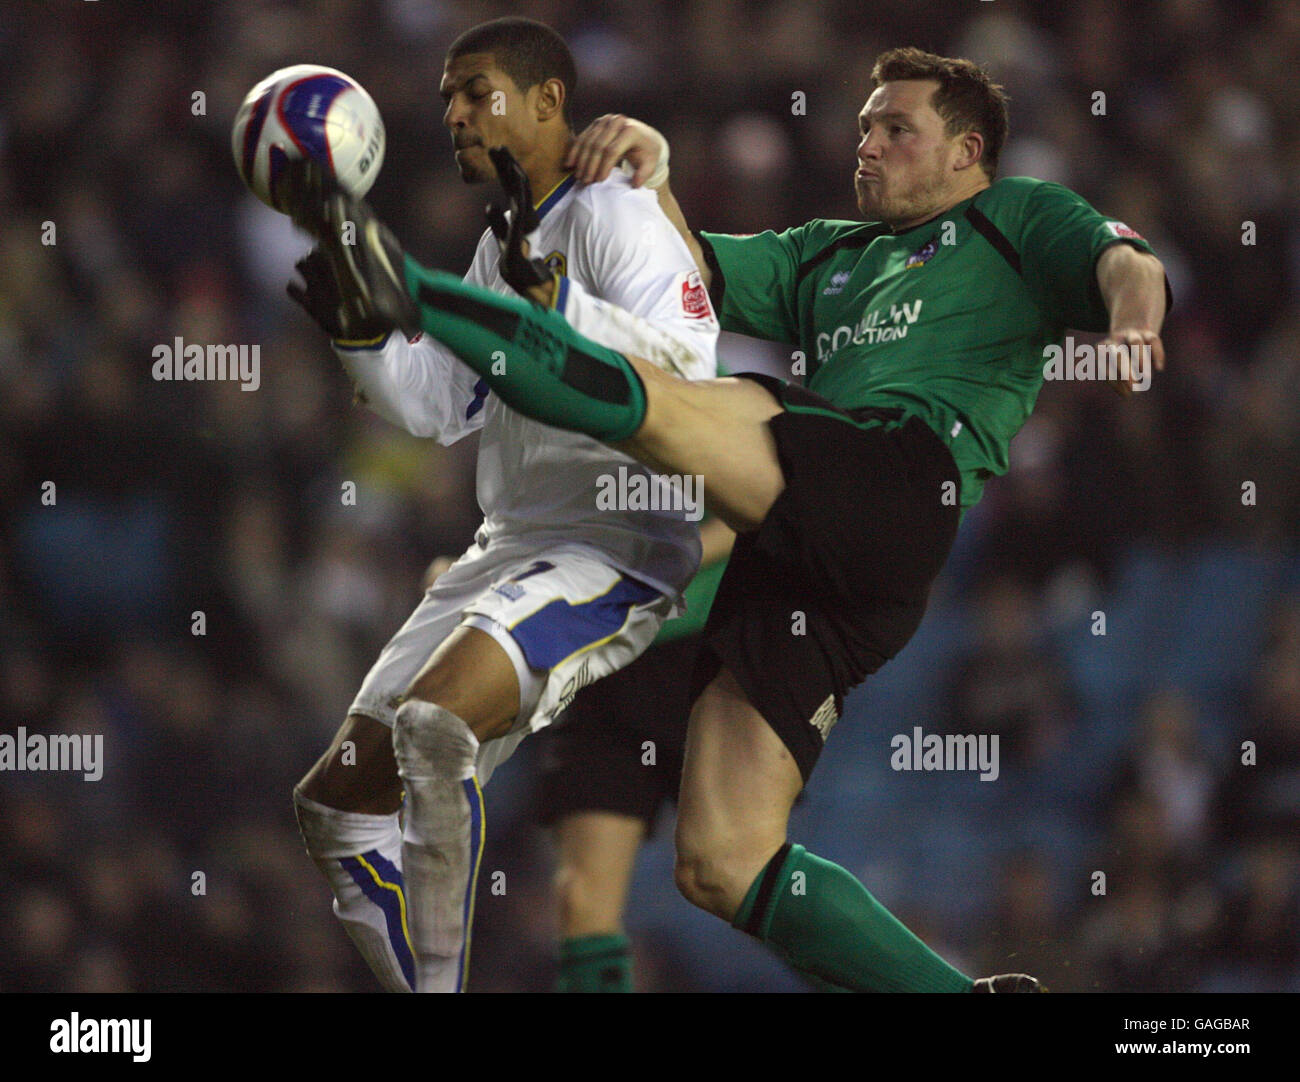 Leeds United's Jermaine Beckford and Bristol Rovers Steve Elliott in action during the Coca-Cola Football League One match at Elland Road, Leeds. Stock Photo